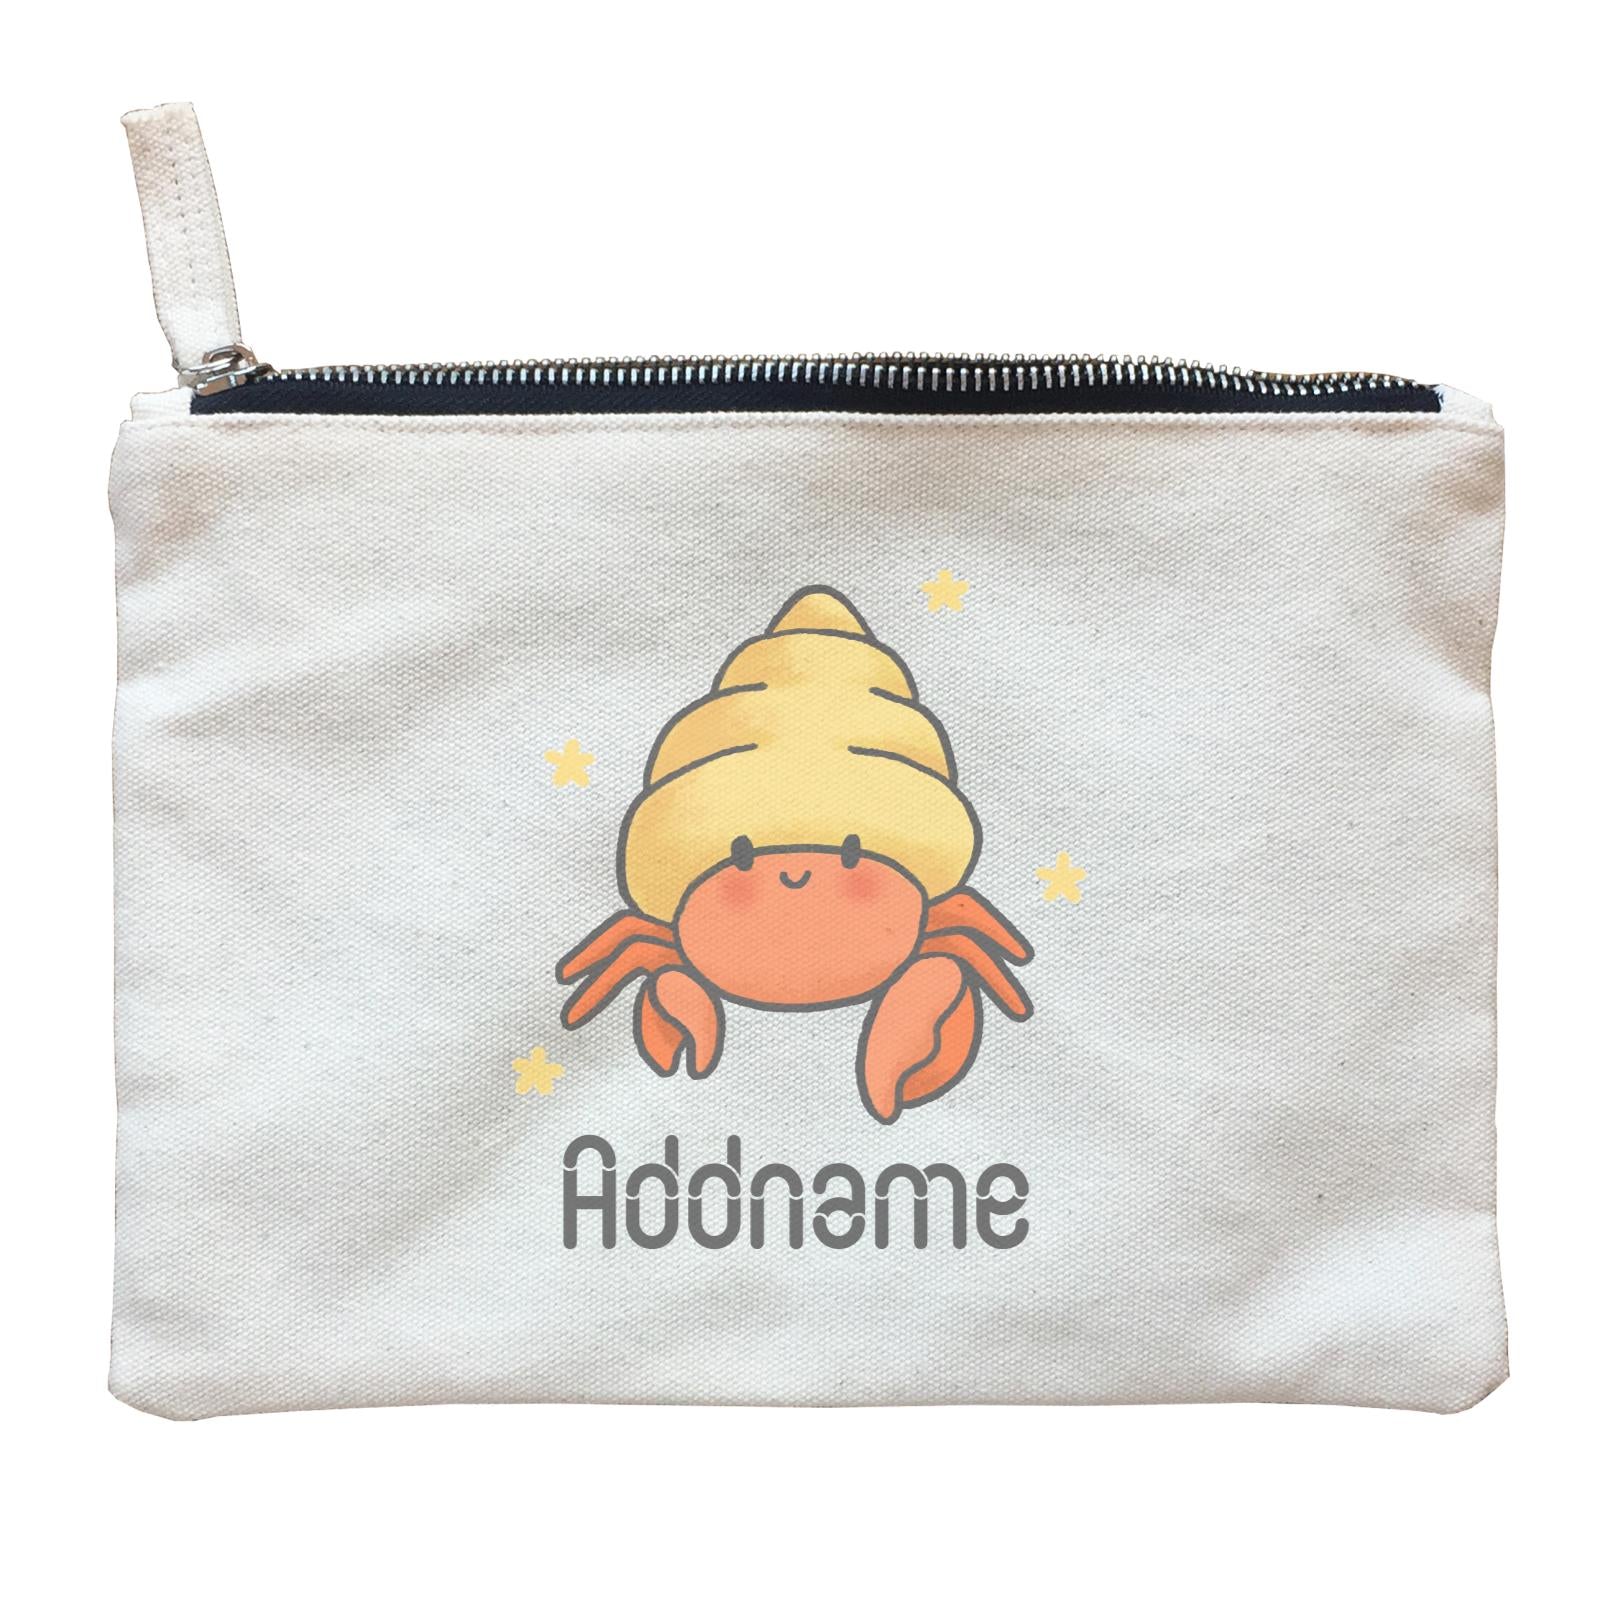 Cute Hand Drawn Style Hermit Crab Addname Zipper Pouch